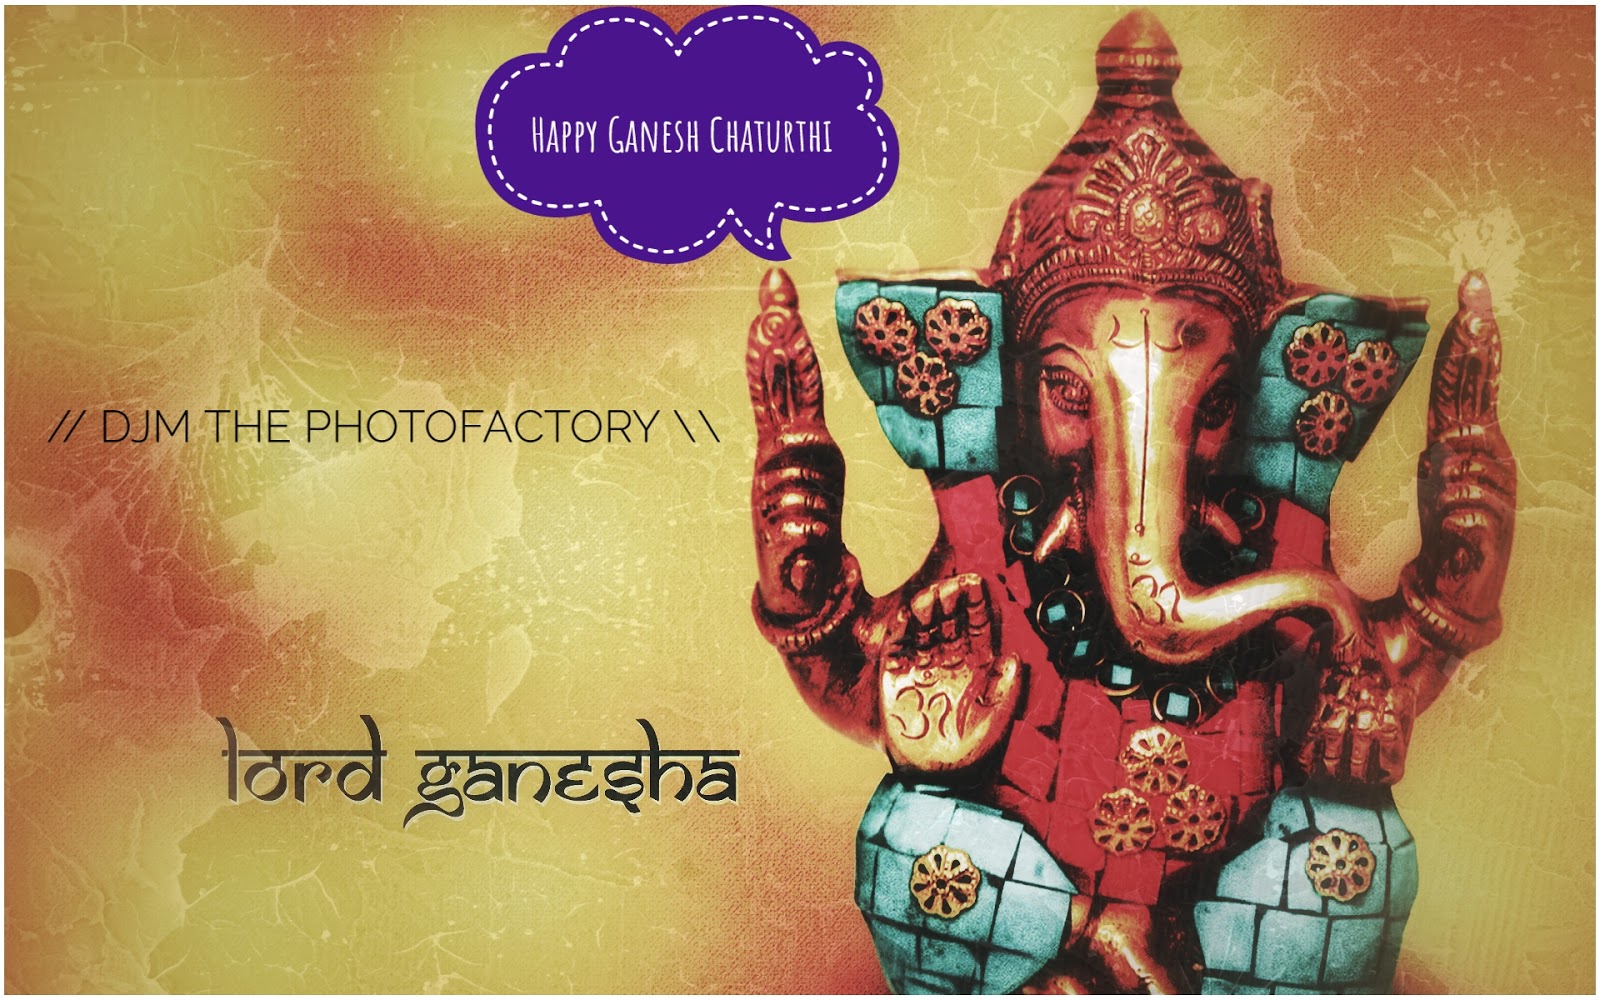 Ganesh Chaturthi Wishes Images 2019, Photos, Quotes, - Cute Happy Ganesh Chaturthi - HD Wallpaper 